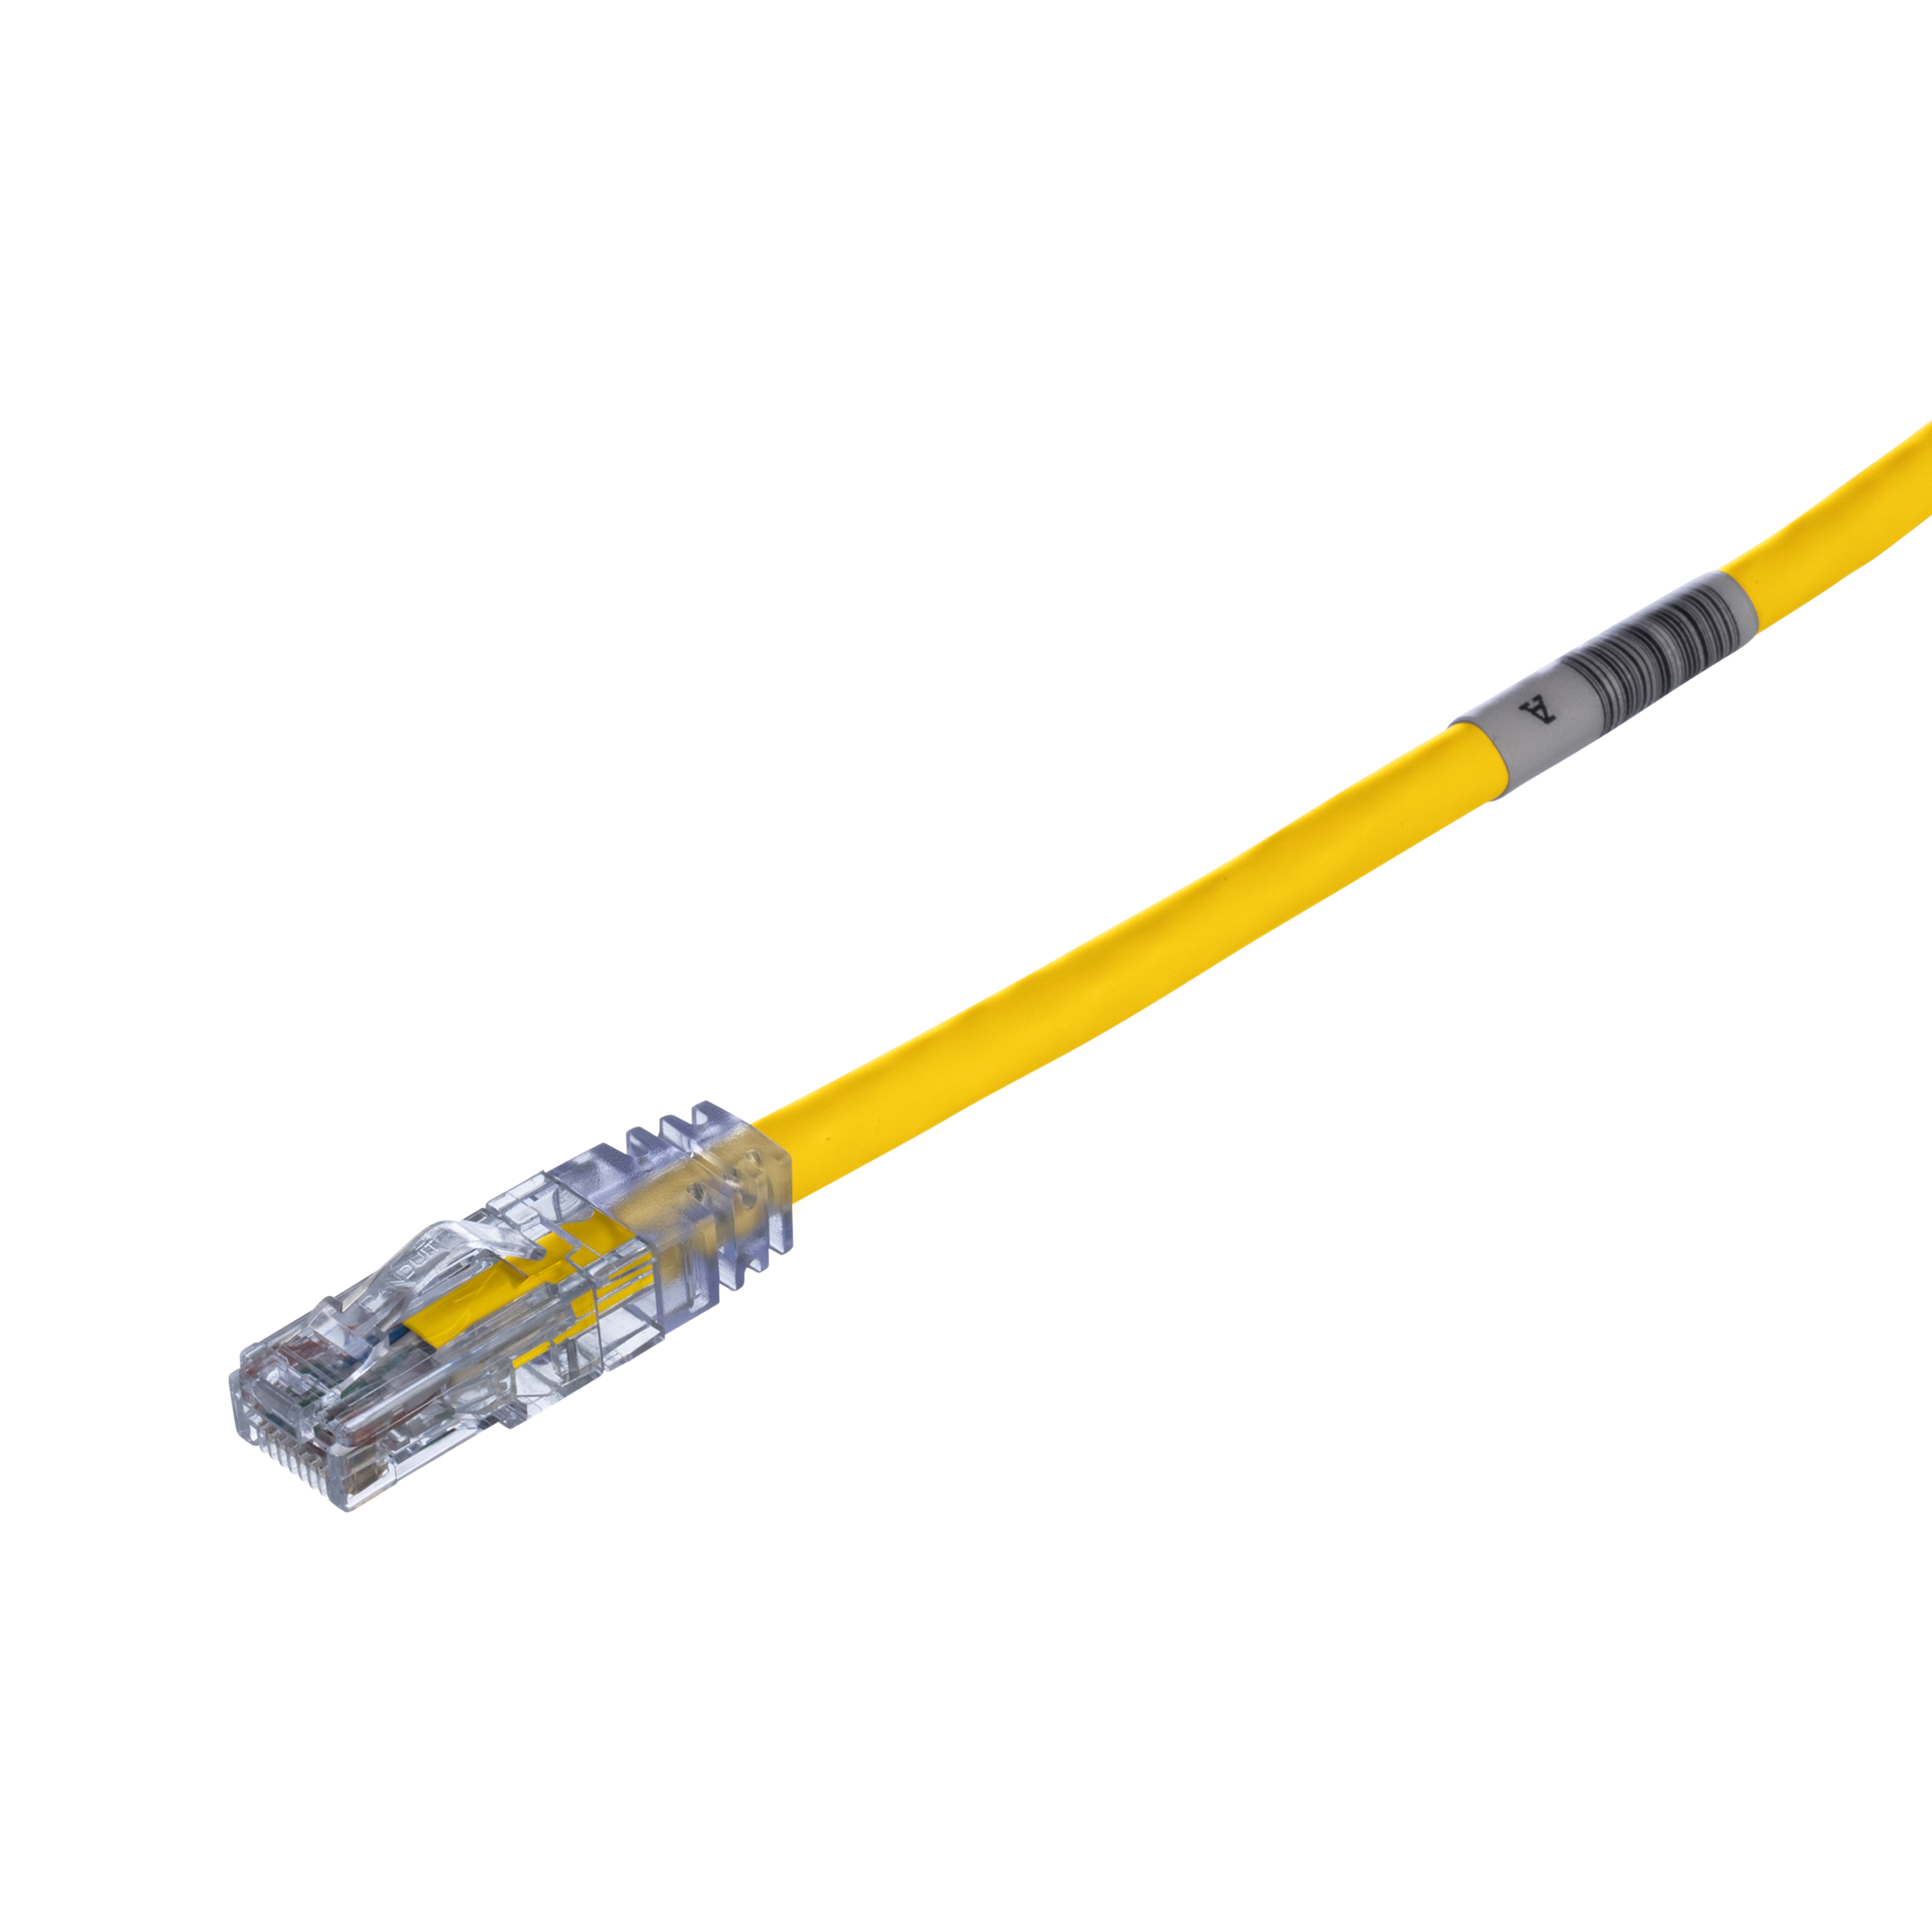 Cat 6 24 AWG UTP Copper Patch Cord, 9 ft, Yellow